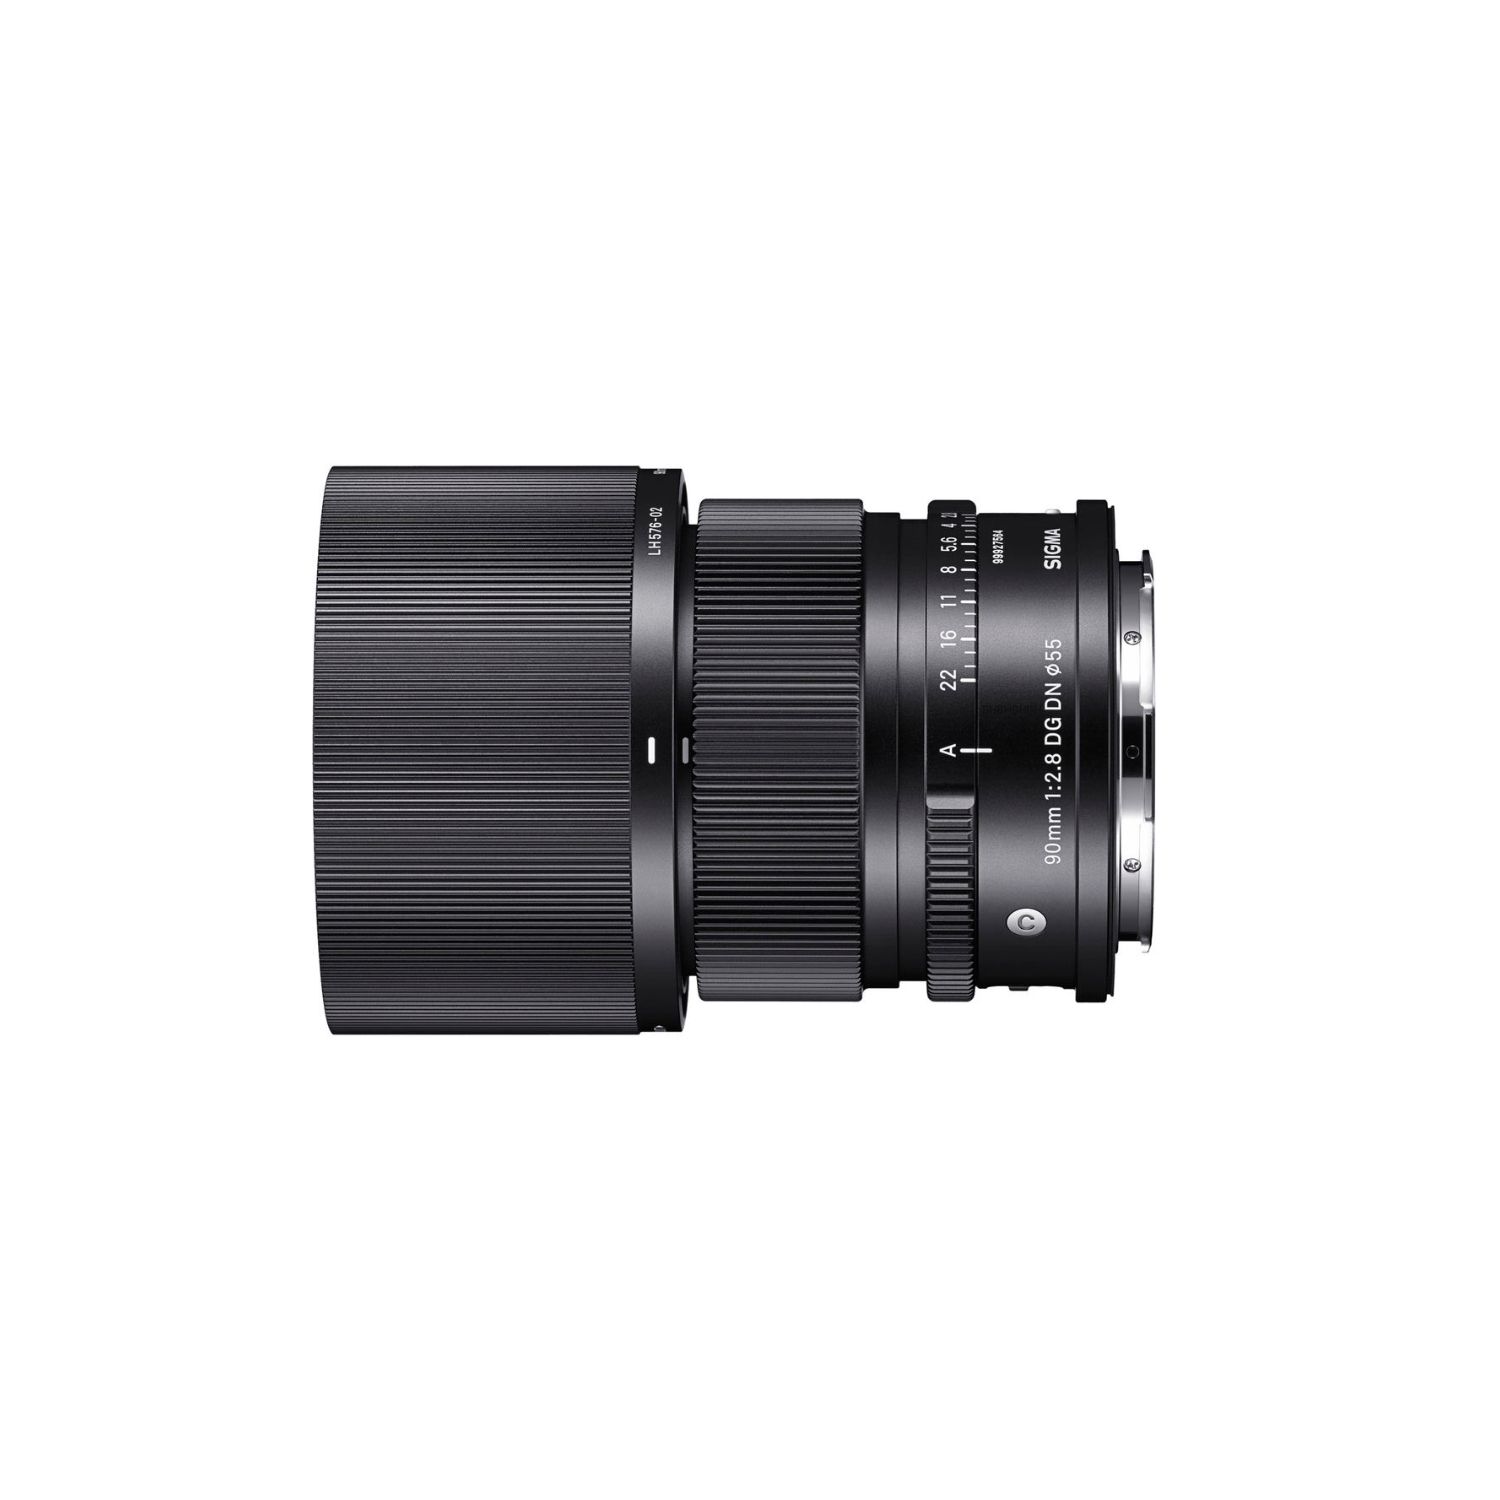 Sigma 90mm f/2.8 DG DN Contemporary Lens for L-Mount 4261969 